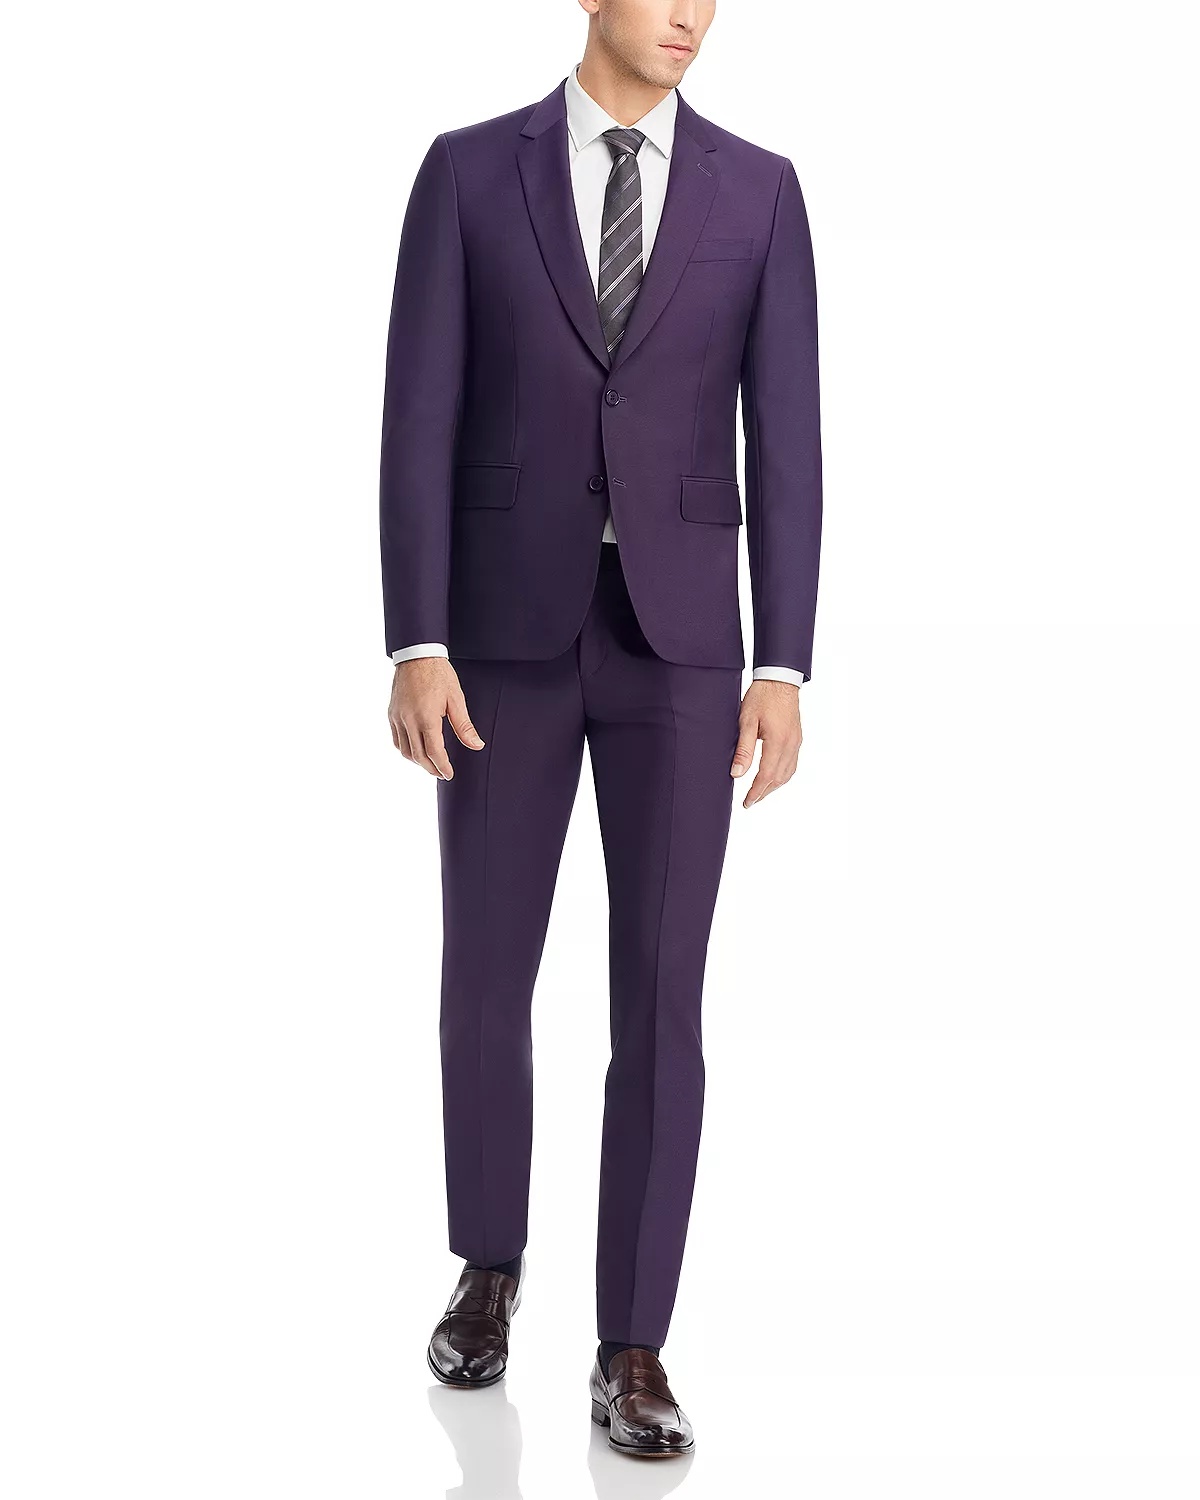 Soho Wool & Mohair Extra Slim Fit Suit - 1